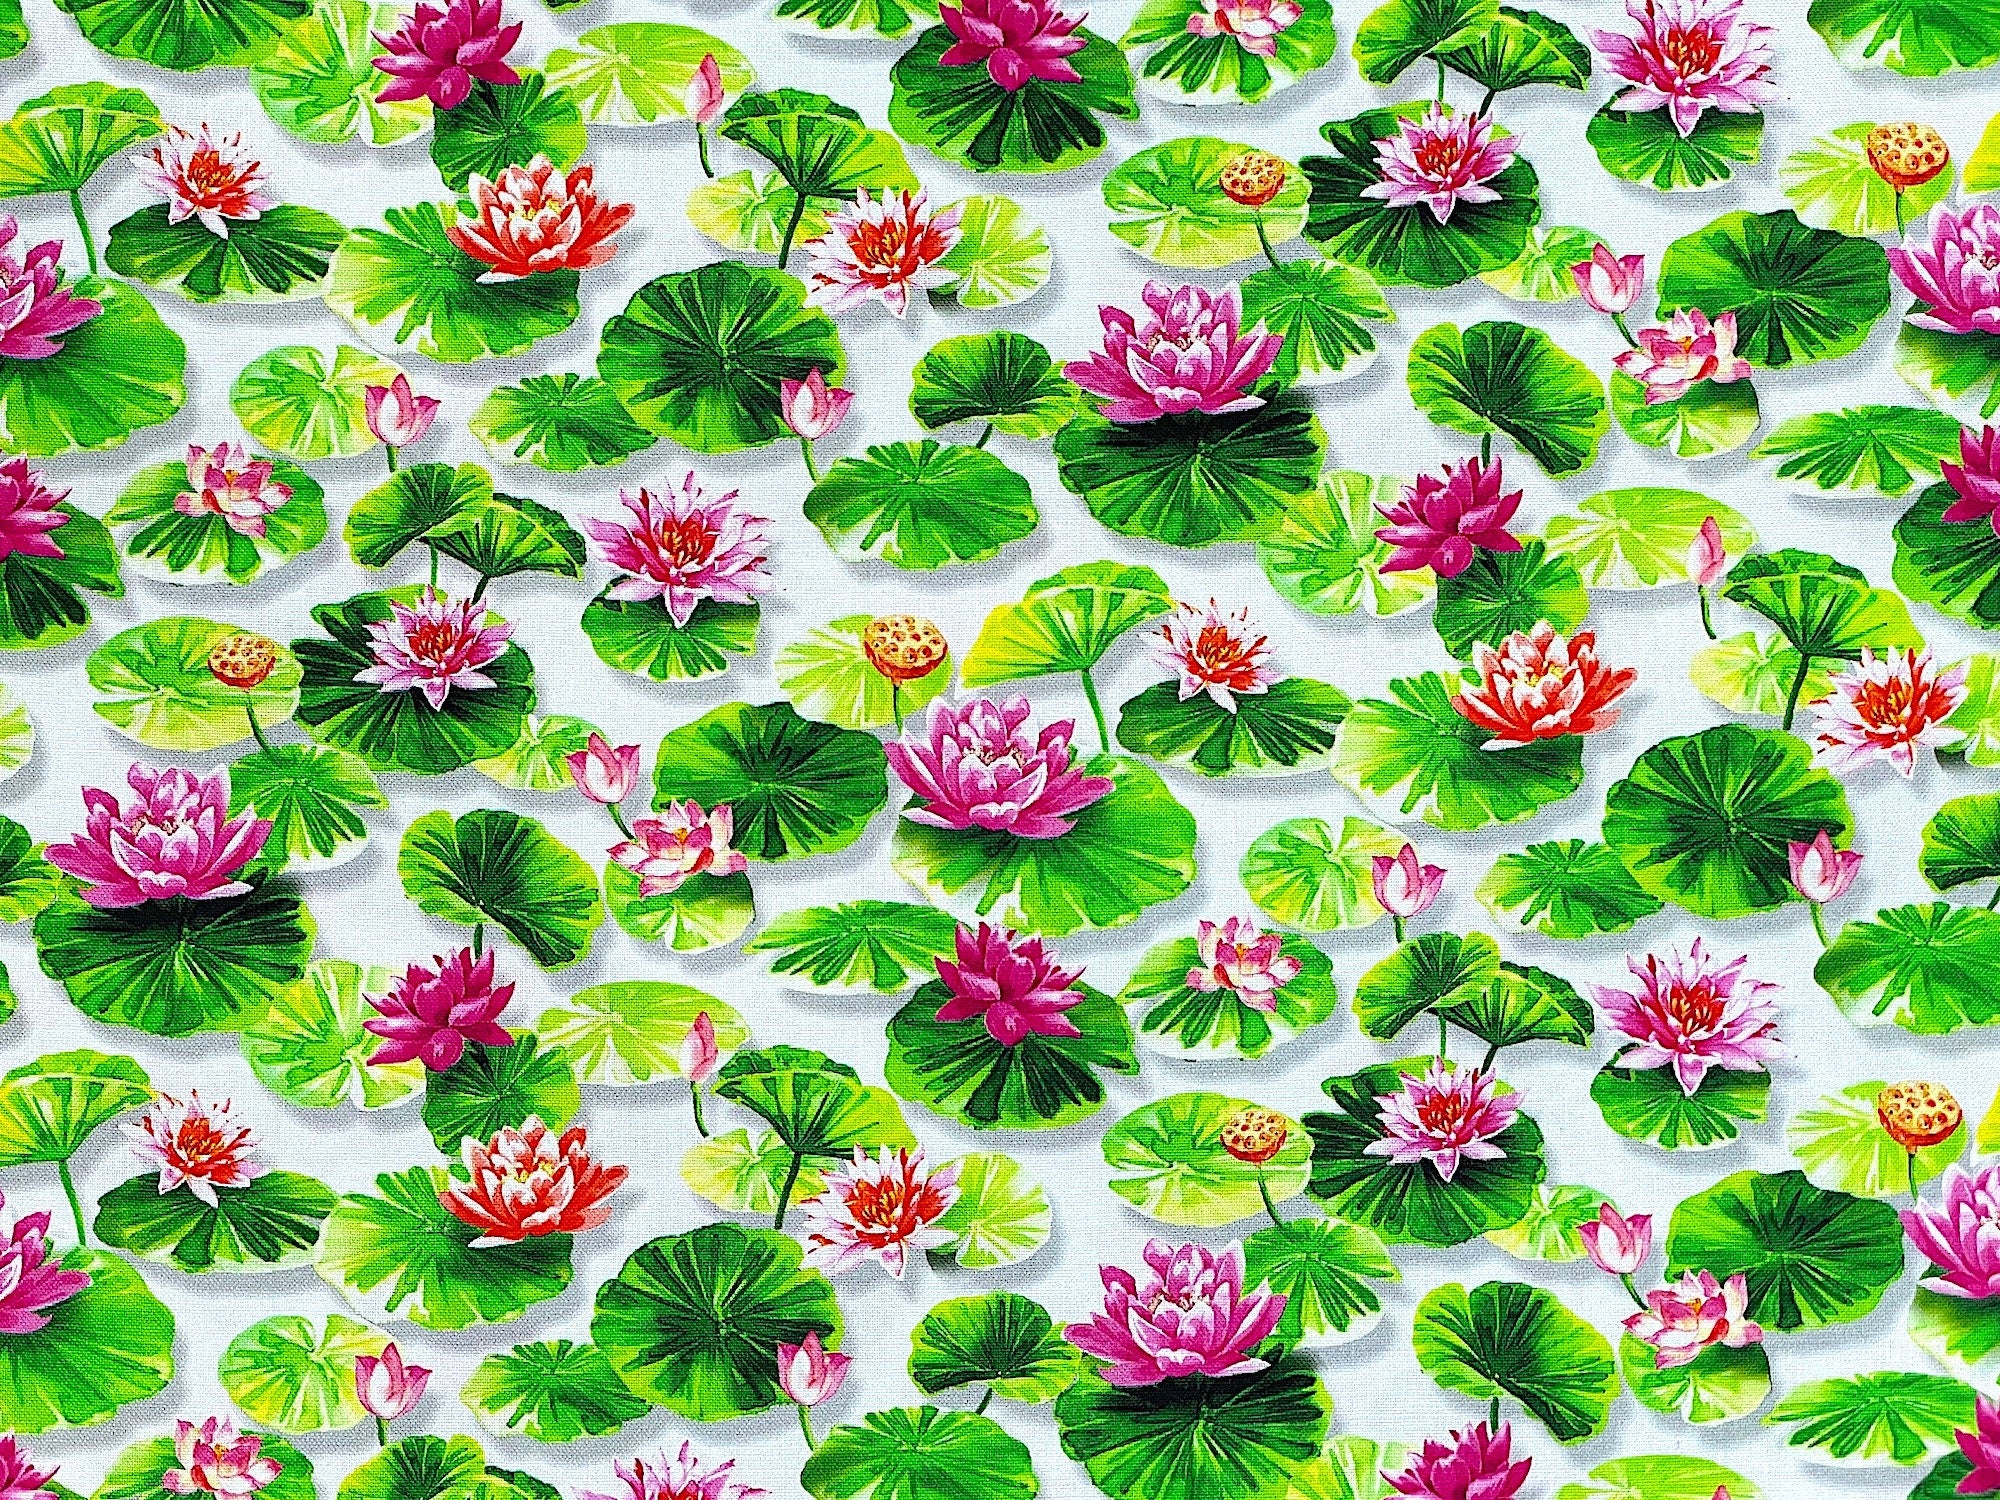 This cotton fabric is covered with water lotus throughout the fabric. The water lotus are in shades of red and orange. This fabric is part of the Koi Pond collection by Michael Miller.